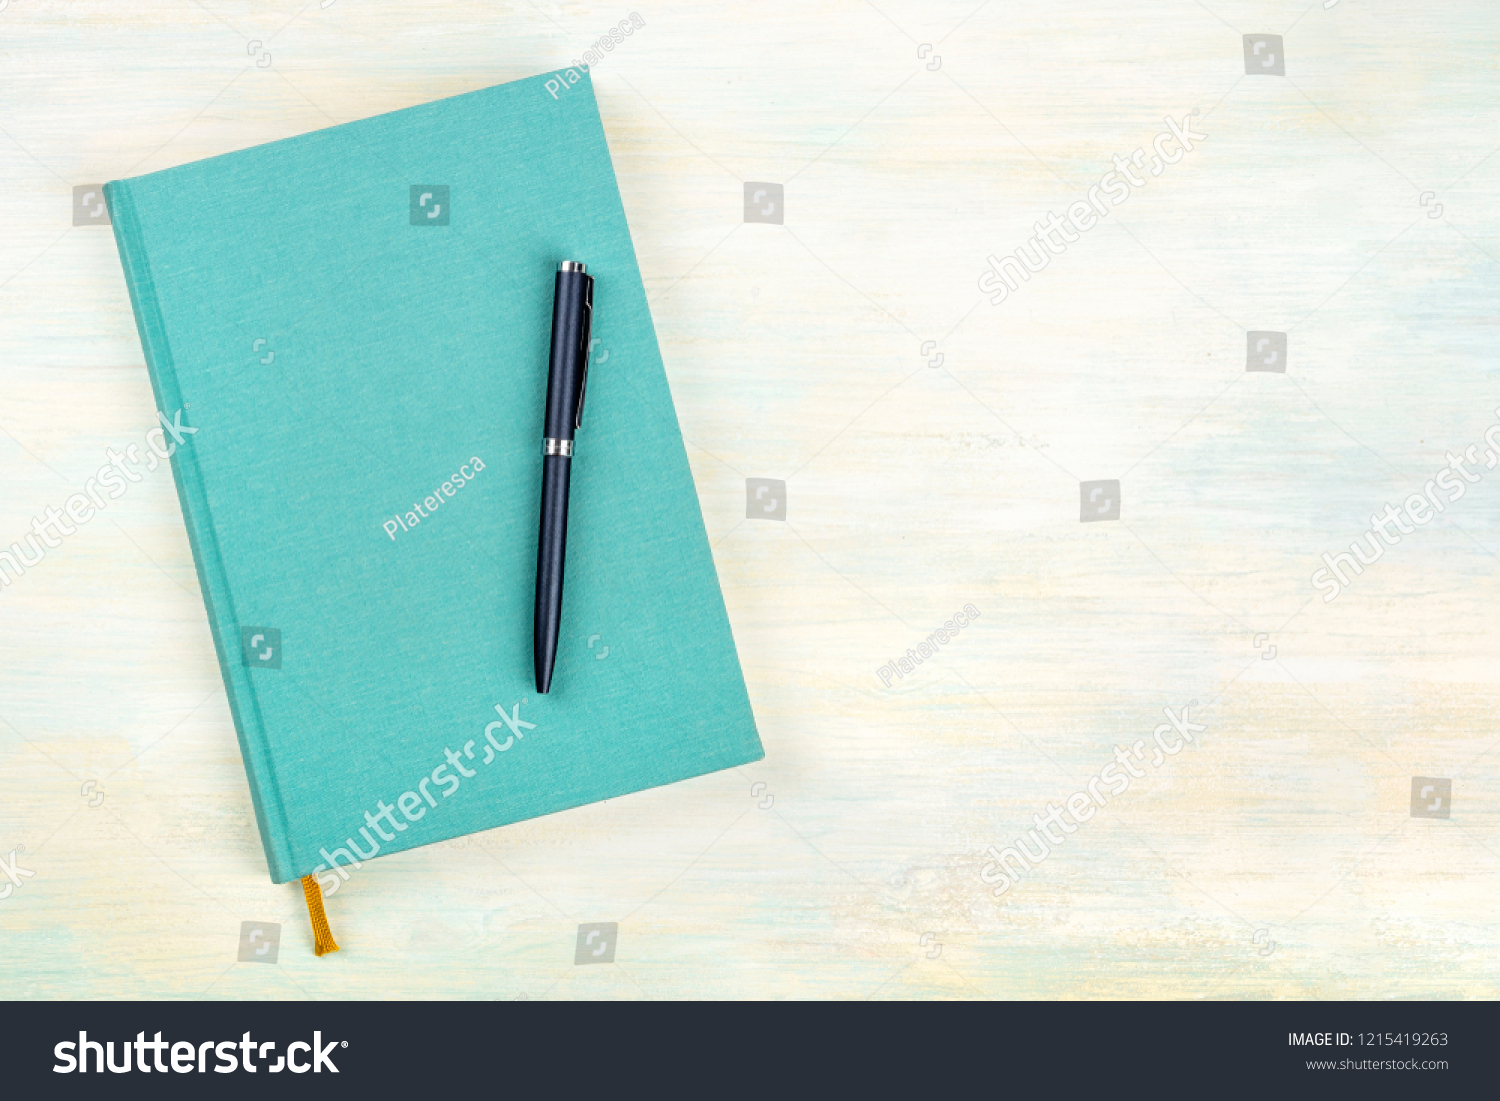 A photo of a teal blue journal with a pen, an elegant diary, notebook or planner, shot from above with copy space #1215419263